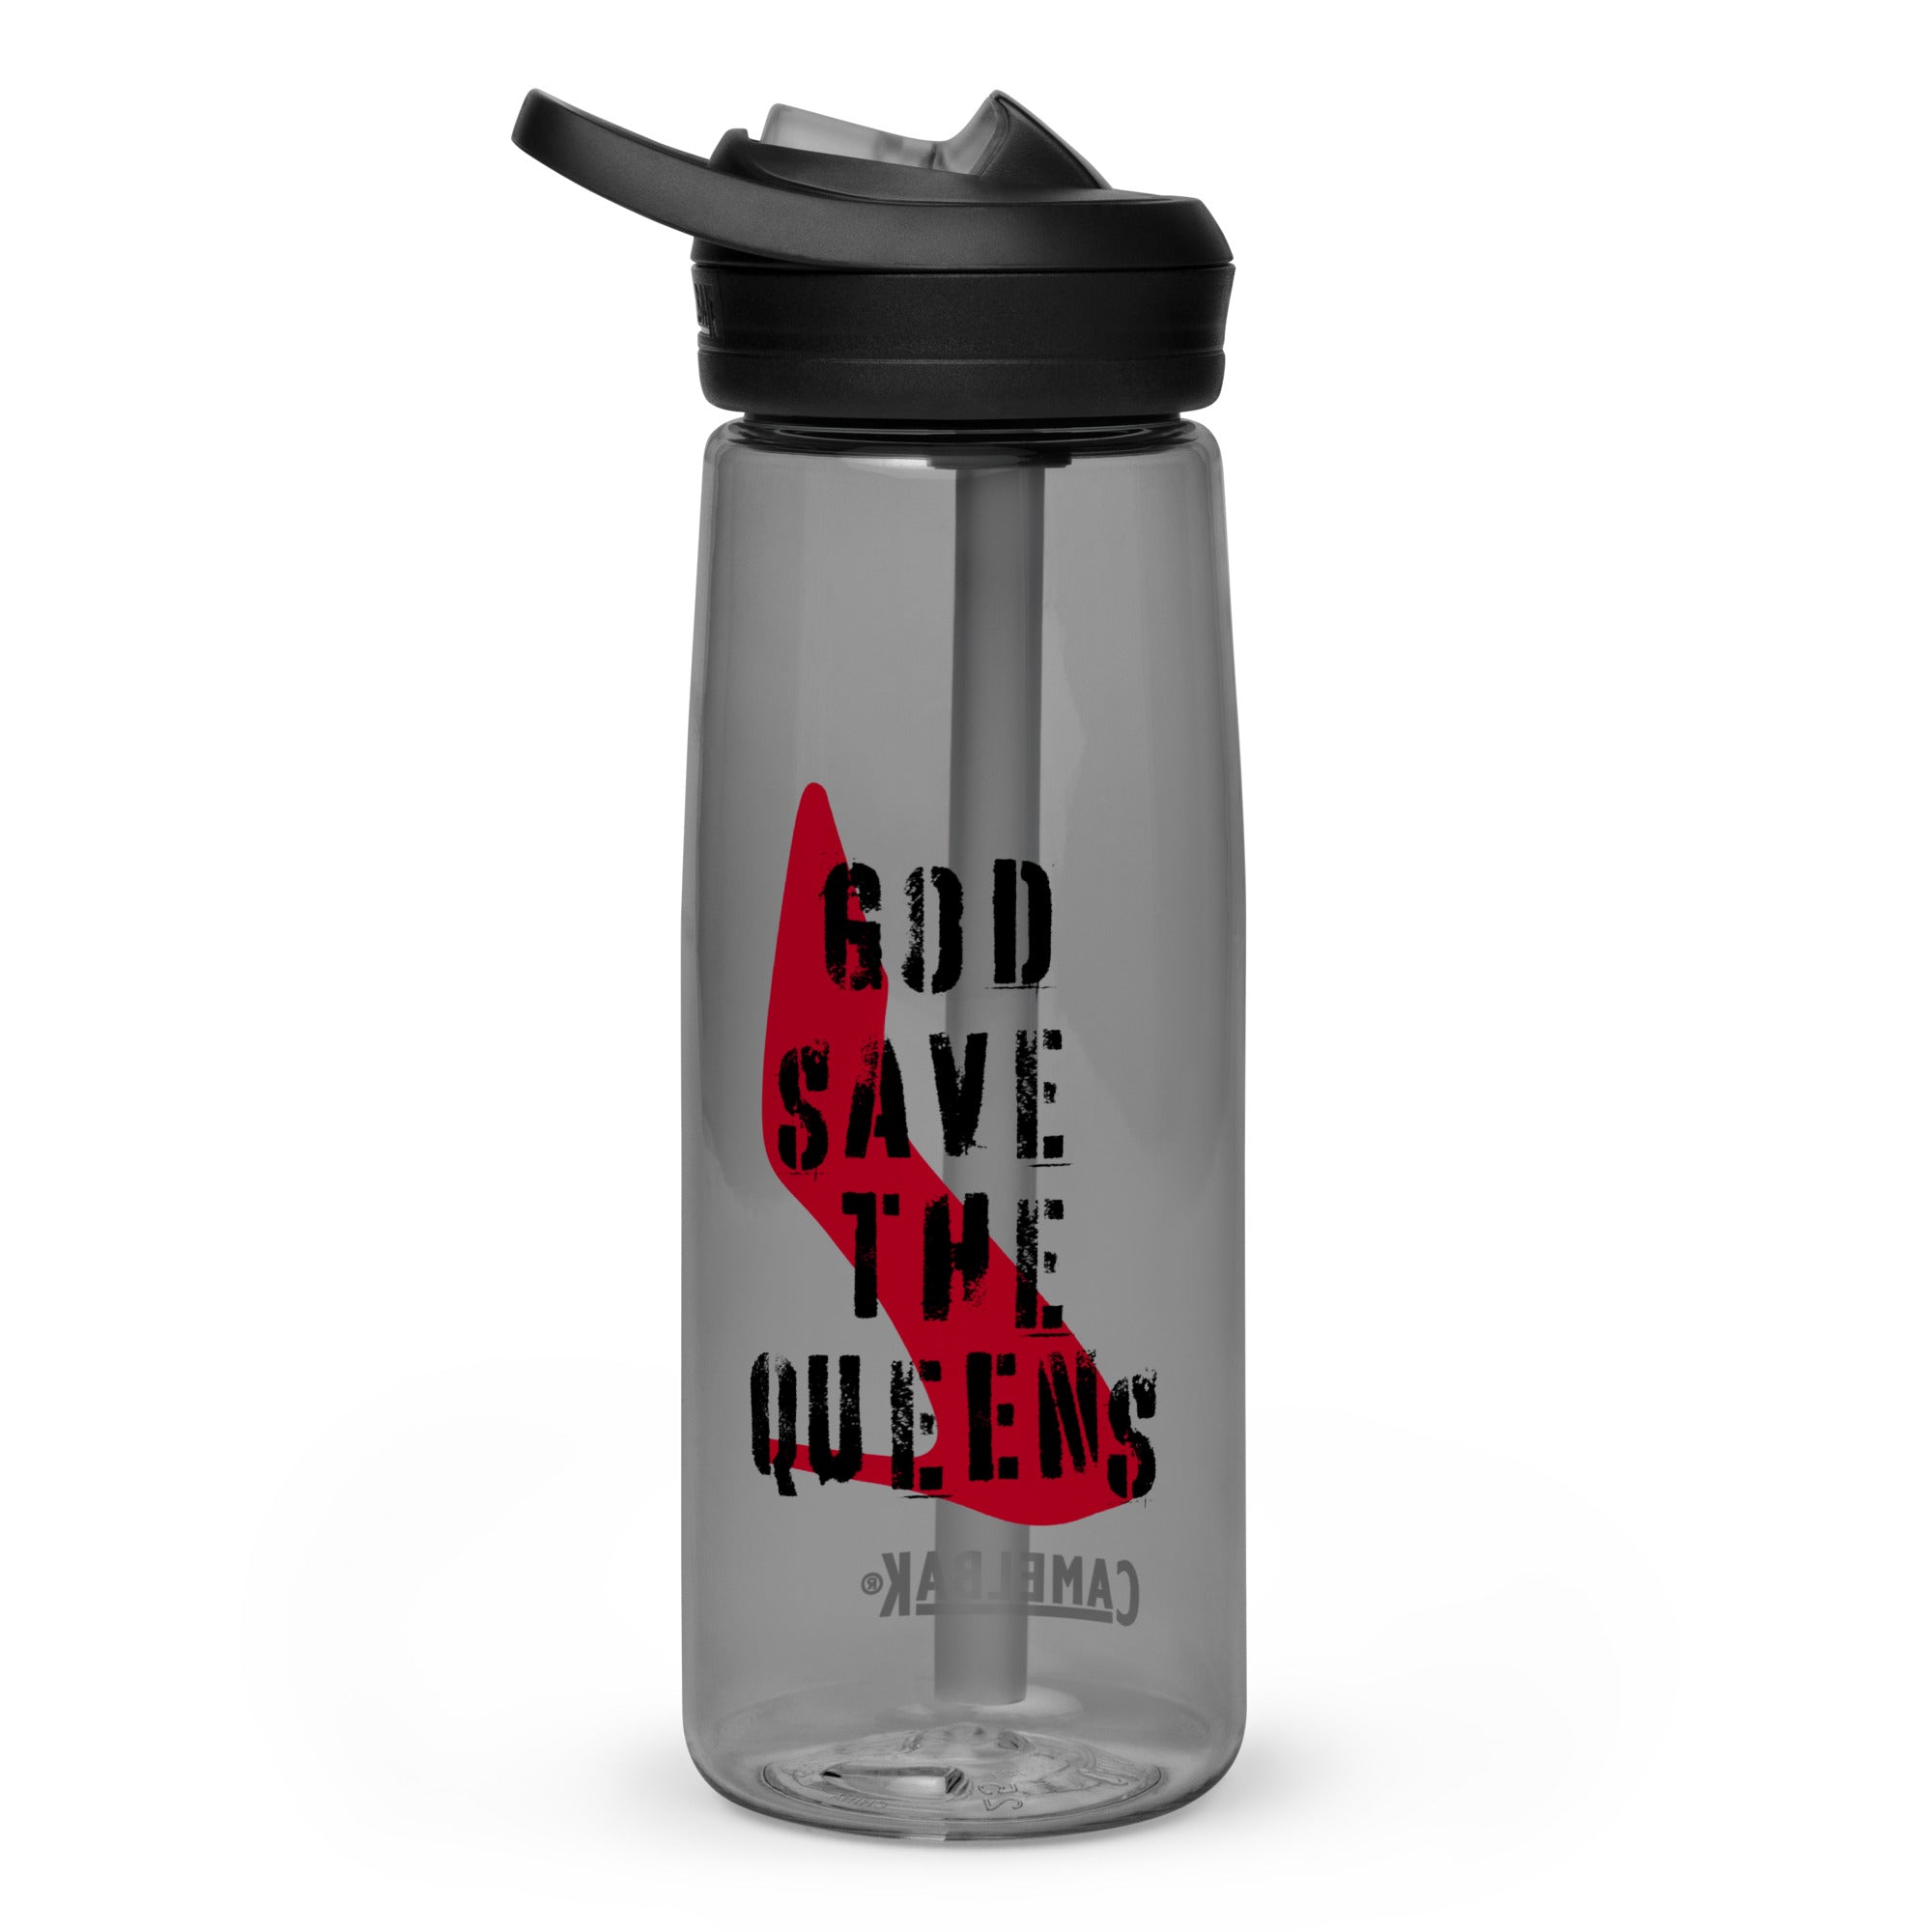 God Save the Queens Royal water bottle